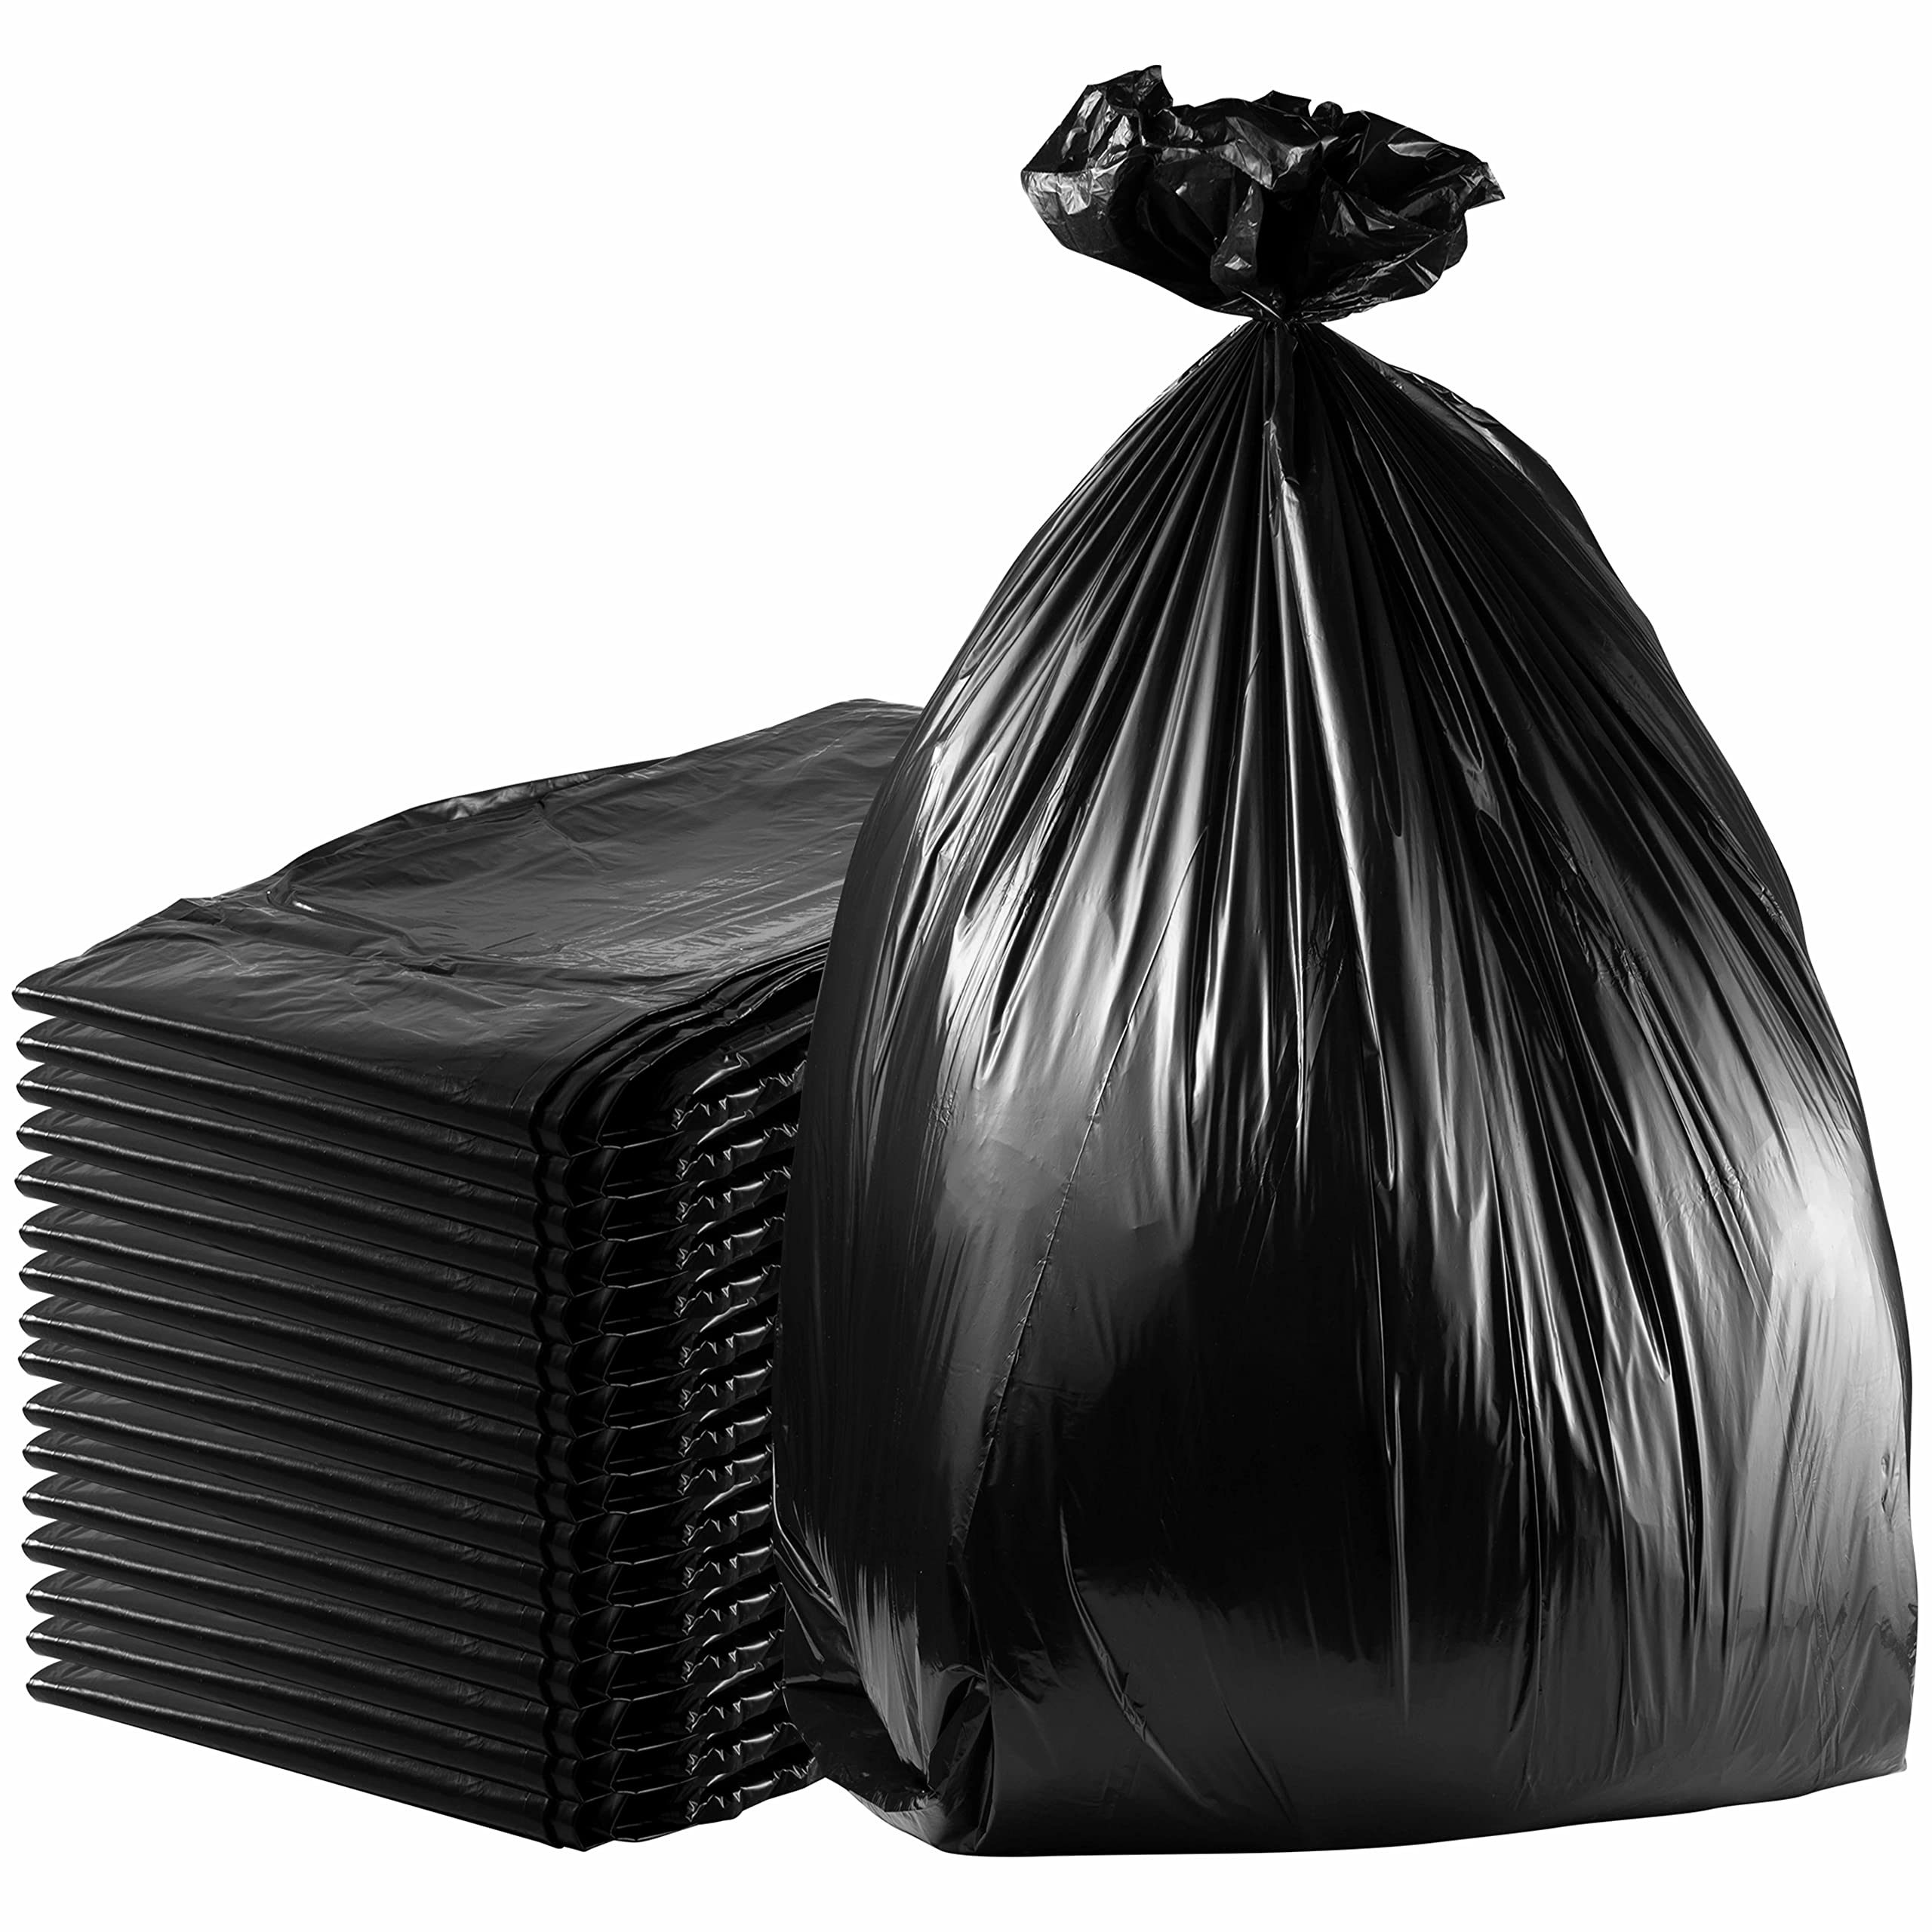 Haulmark Industrials 42-45 Gallon Black Trash Bags, 50 Count Bulk Pack,  Heavy Duty 3 MIL Contractor Garbage Bags, Foodservice, Janitorial,  Commercial, Outdoor, Lawn, Leaf, Can Liners